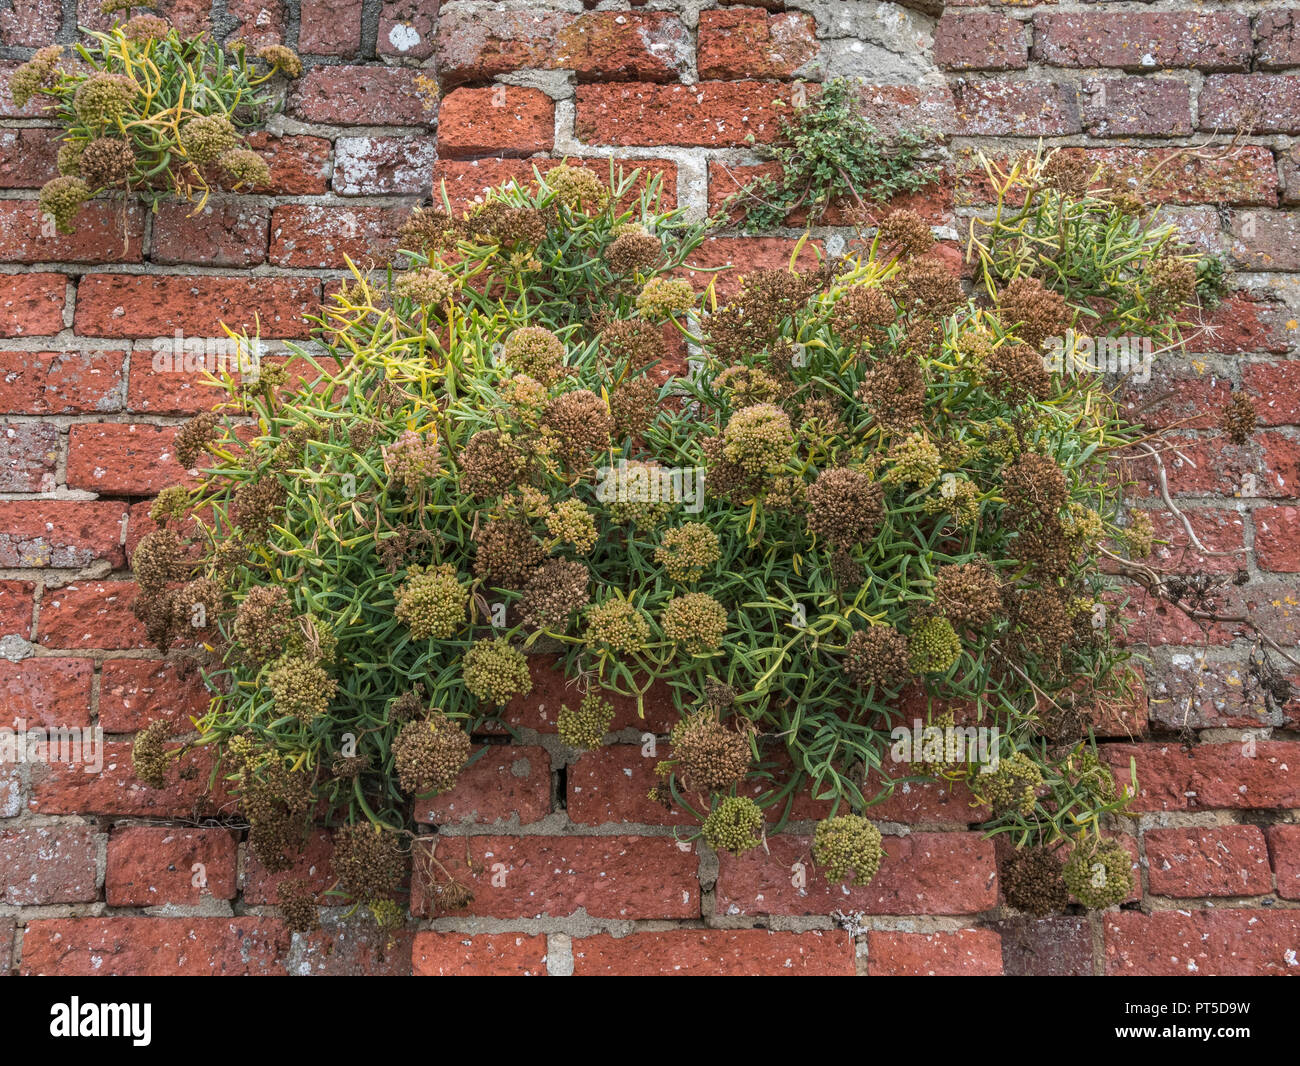 Rock Samphire (Crithmum maritimum) rowing out of a brick wall (Cornwall). Foraged as a wild food and eaten pickled. Stock Photo